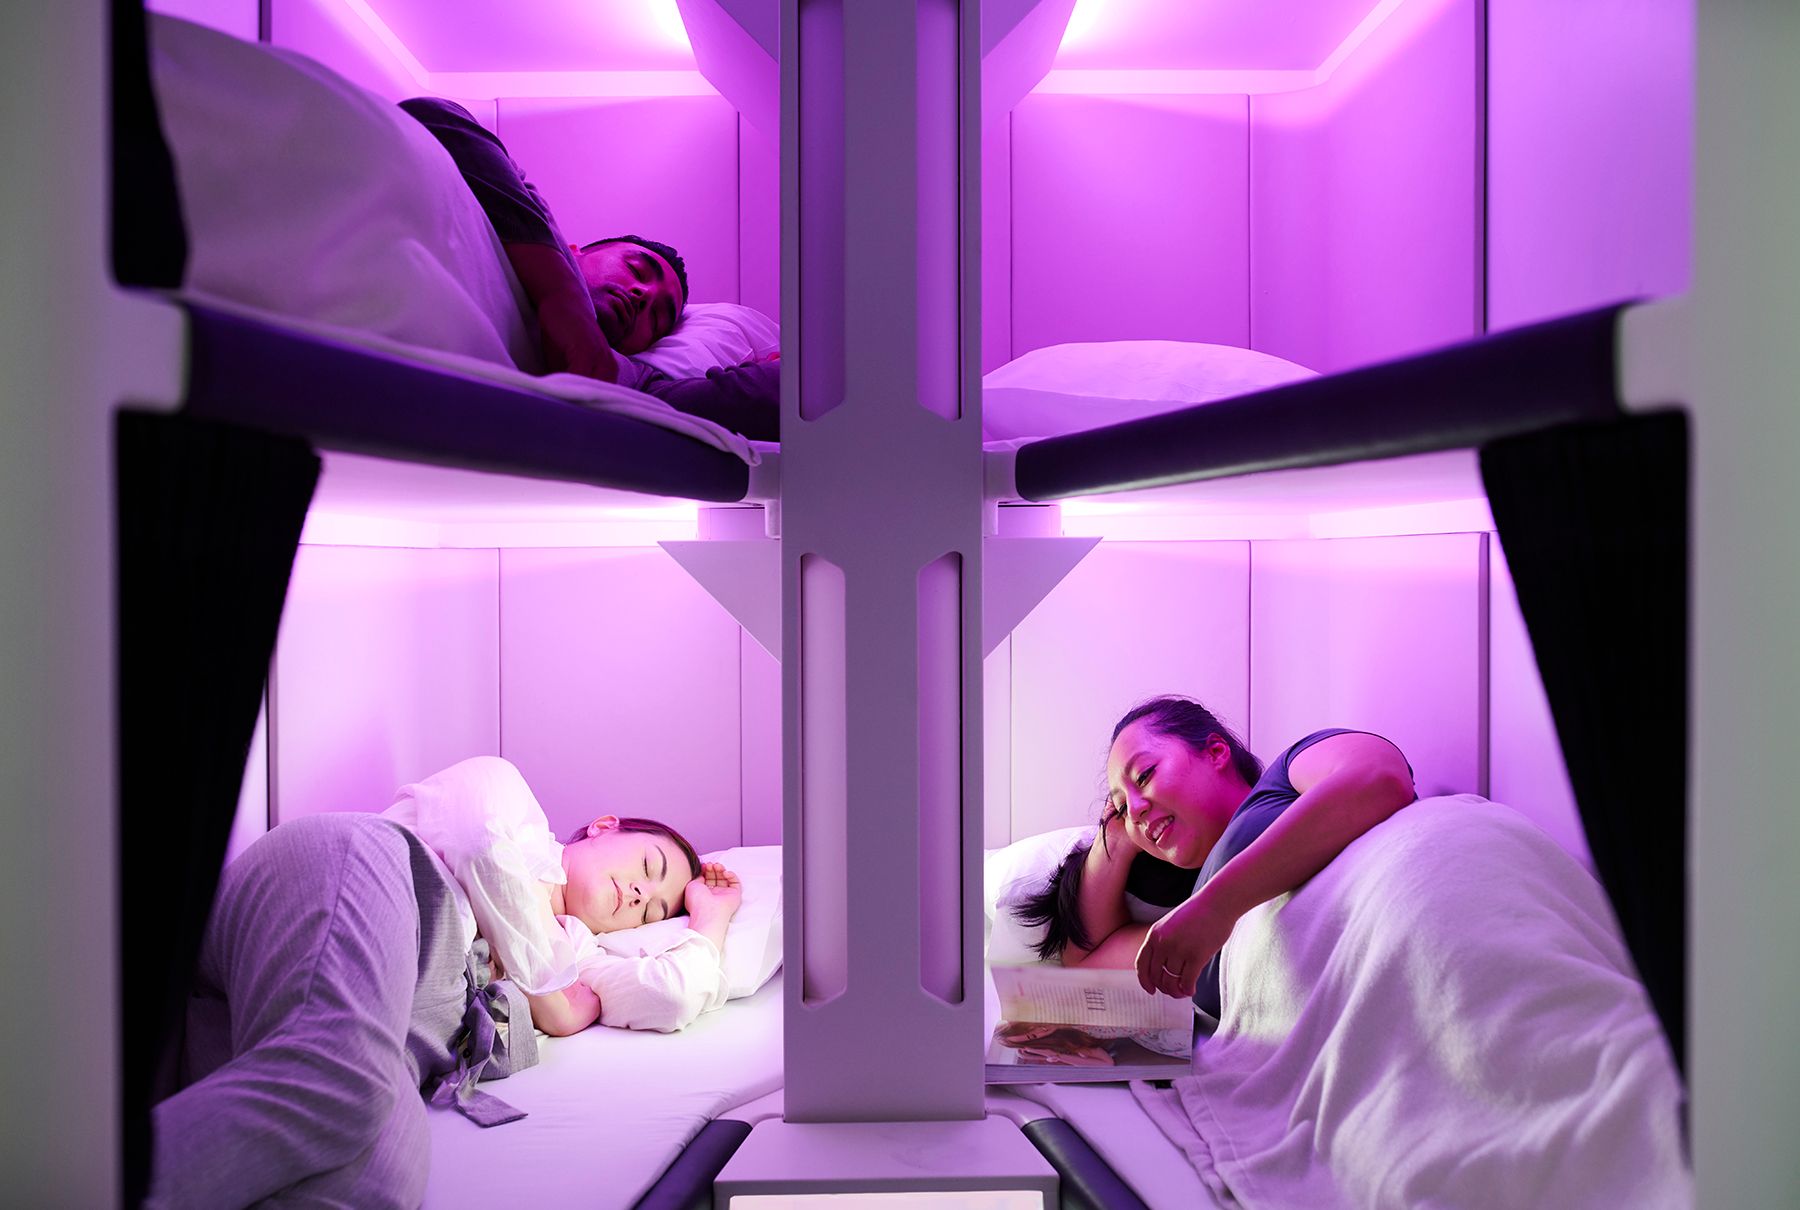 A photo of Air New Zealand's Economy Class Skynest with people sleeping.